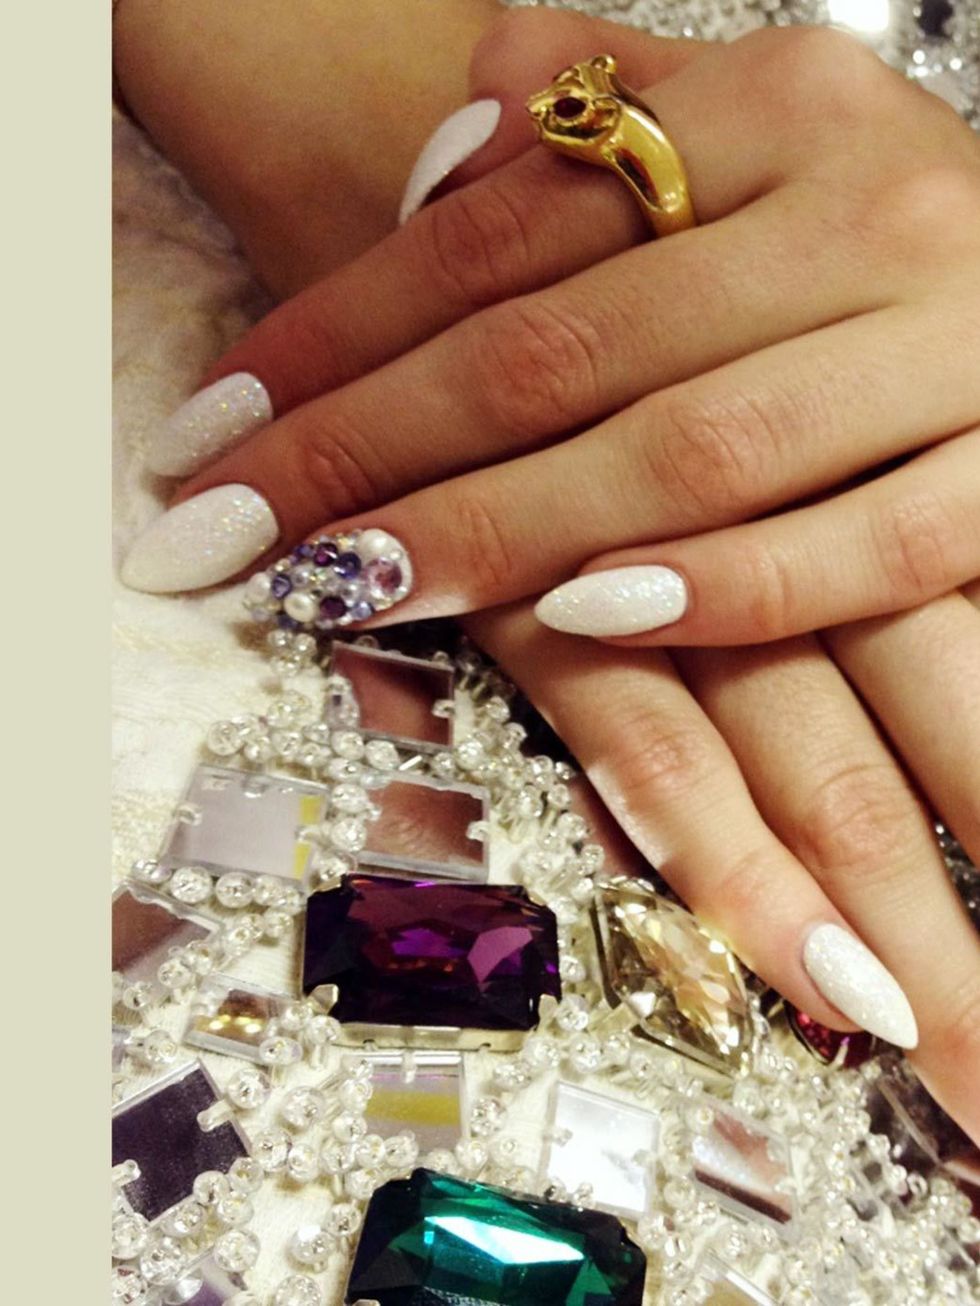 <p>If you've tried our first Jessie J nail art look, <a href="http://www.elleuk.com/beauty/make-up-skin/make-up-features/jessie-j-s-nails-the-graphic-moon">The Graphic Moon</a> and the second tutorial <a href="http://www.elleuk.com/beauty/make-up-skin/mak